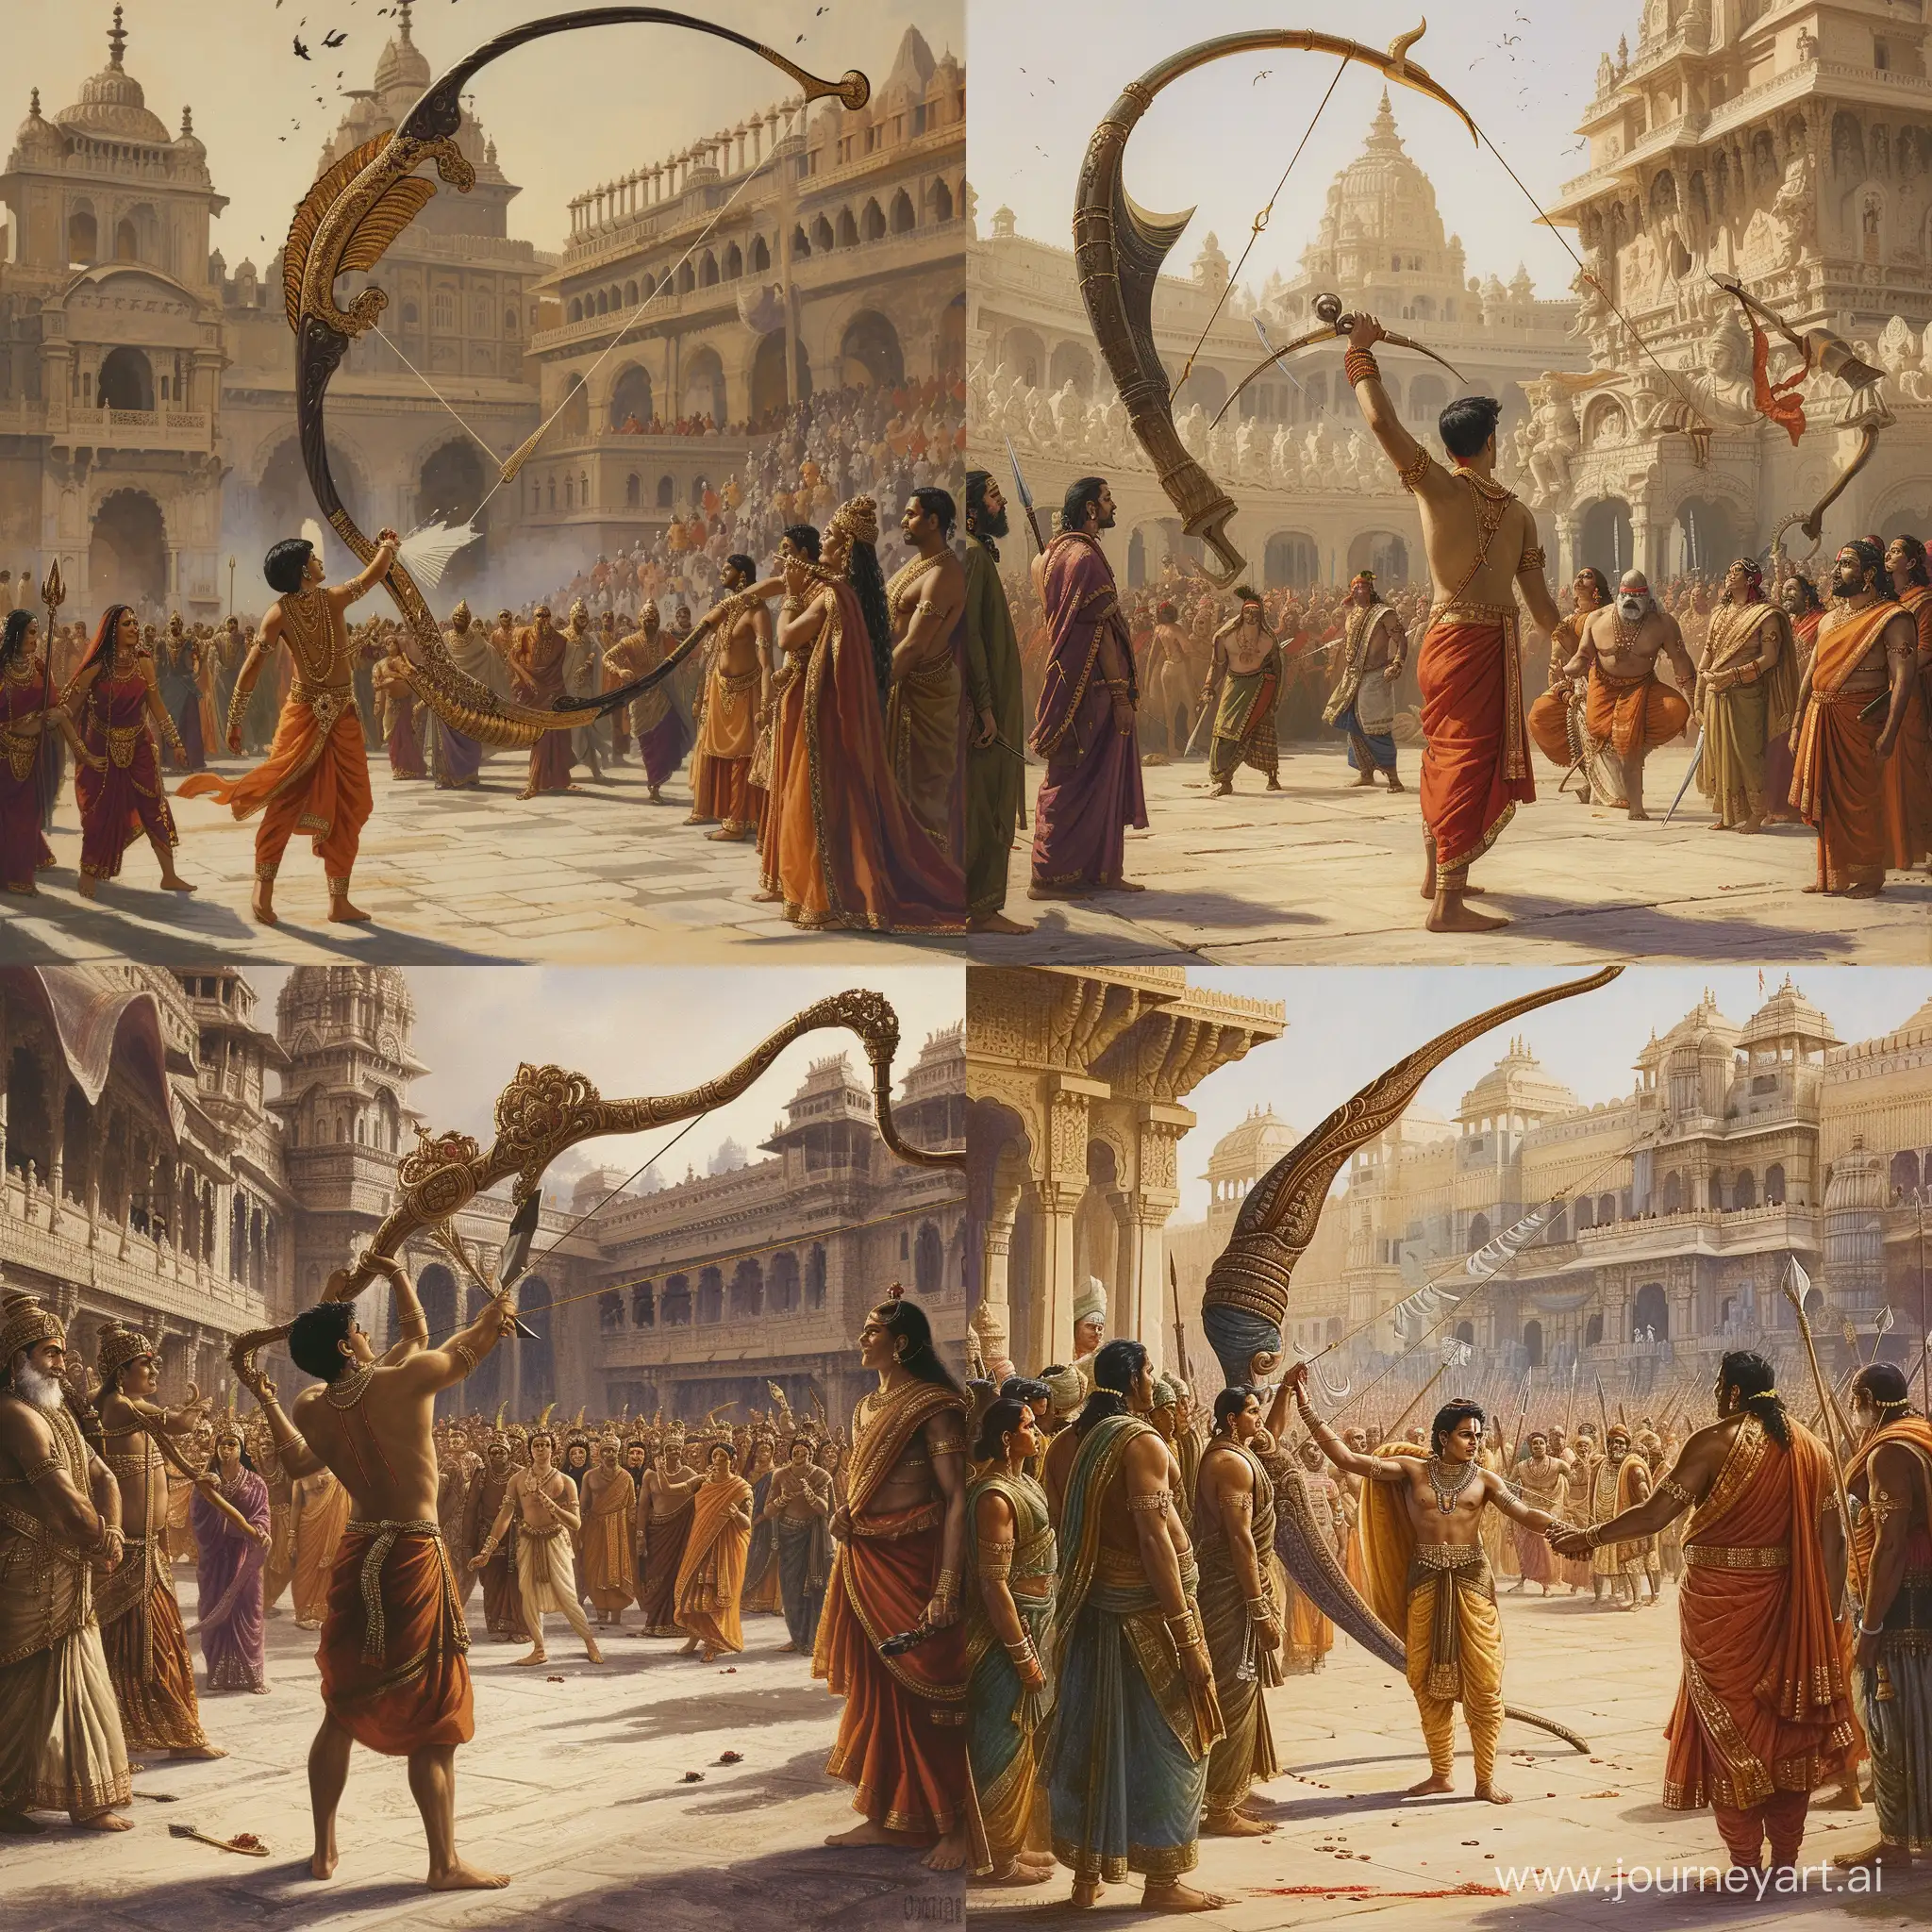 Depict the iconic scene from the Ramayana where Lord Rama, a young and powerful prince adorned in traditional ancient Indian attire, breaks Lord Shiva's bow. The setting is a grand palace courtyard filled with astonished onlookers, including royal figures and sages, dressed in opulent ancient Indian garb. The atmosphere is one of awe and surprise. The bow, enormous and ornate, is depicted in the moment of snapping, emphasizing the strength and divine power of Lord Rama. The background should reflect an ancient Indian palace, with intricate architectural details, and the sky is clear and bright, symbolizing the auspicious moment. Ensure high detail and realism to capture the magnificence and significance of this legendary event